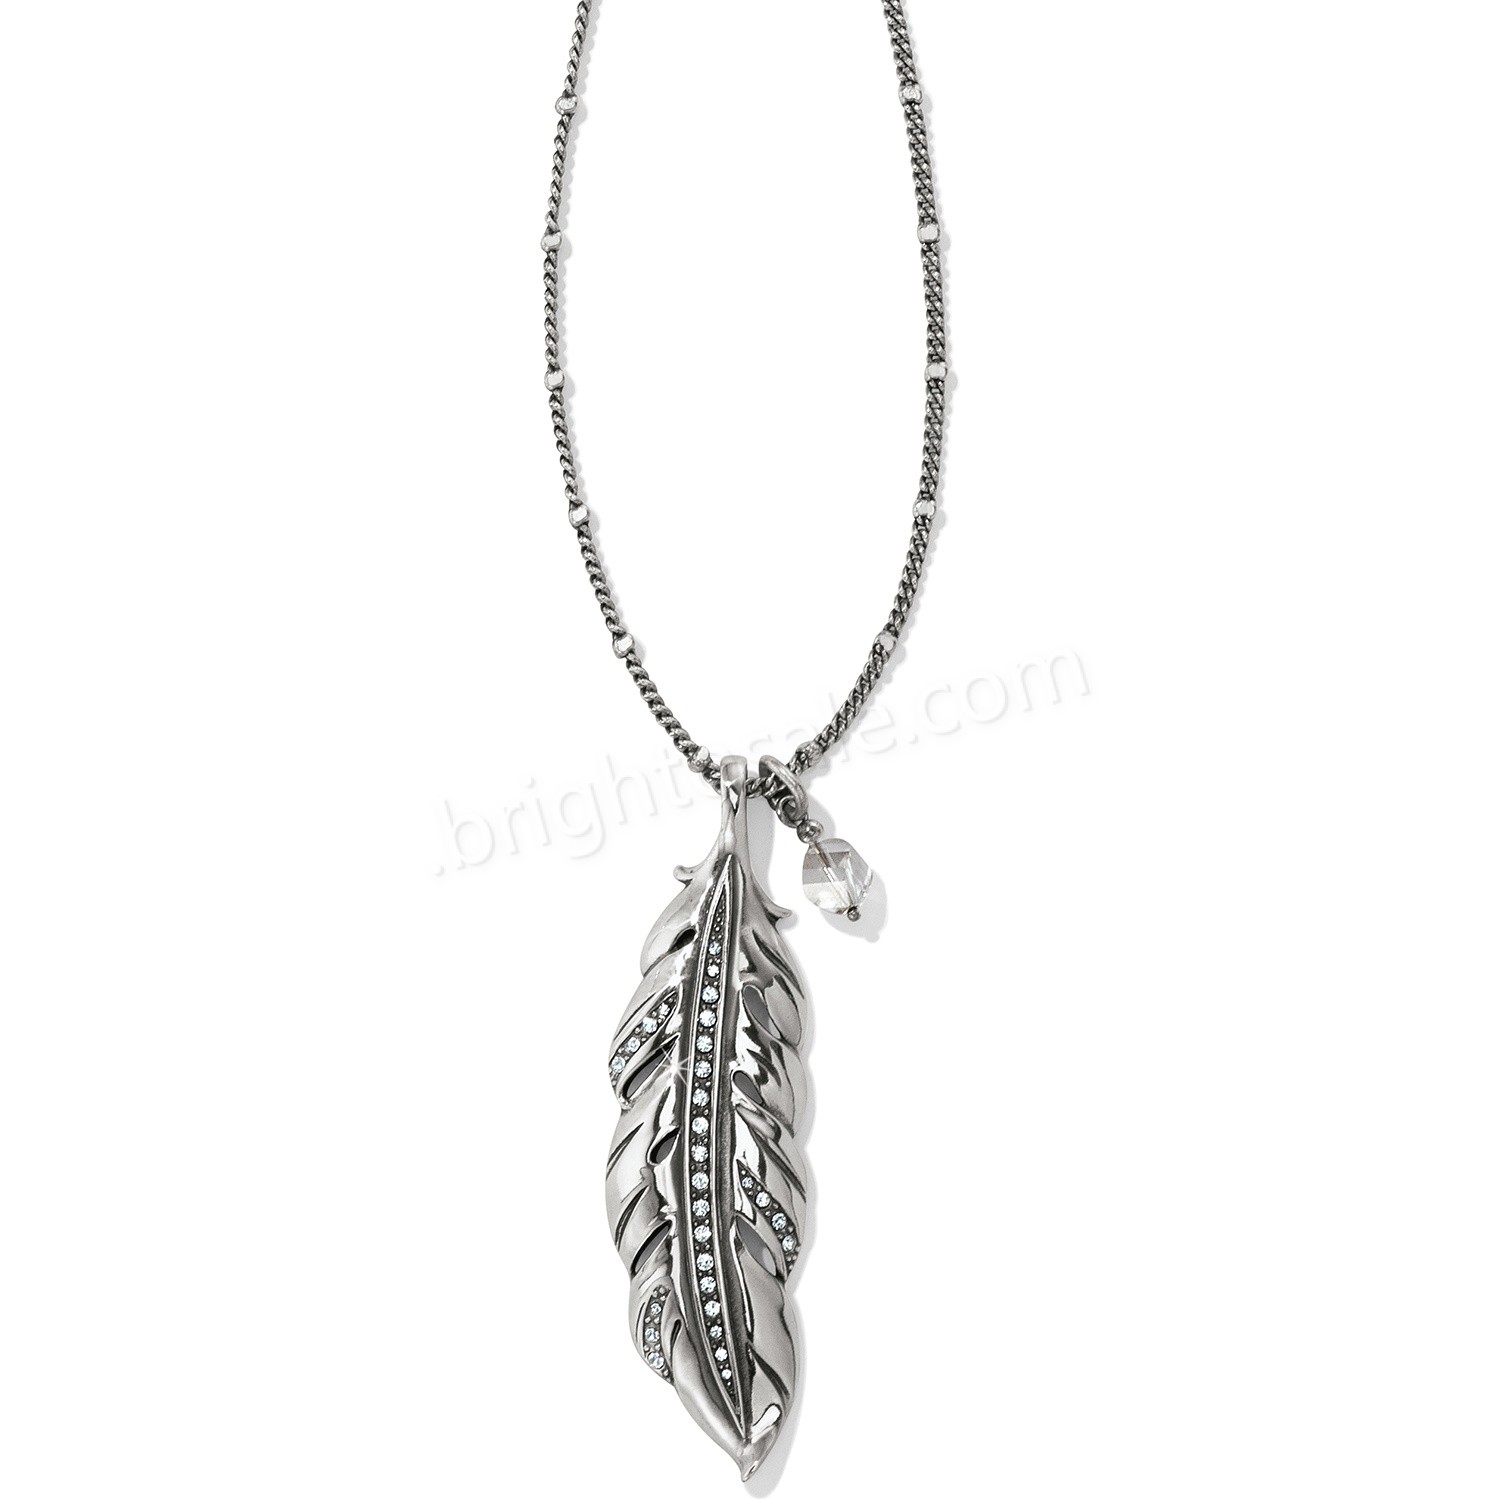 Brighton Collectibles & Online Discount Contempo Ice Feather Convertible Reversible Necklace - Brighton Collectibles & Online Discount Contempo Ice Feather Convertible Reversible Necklace